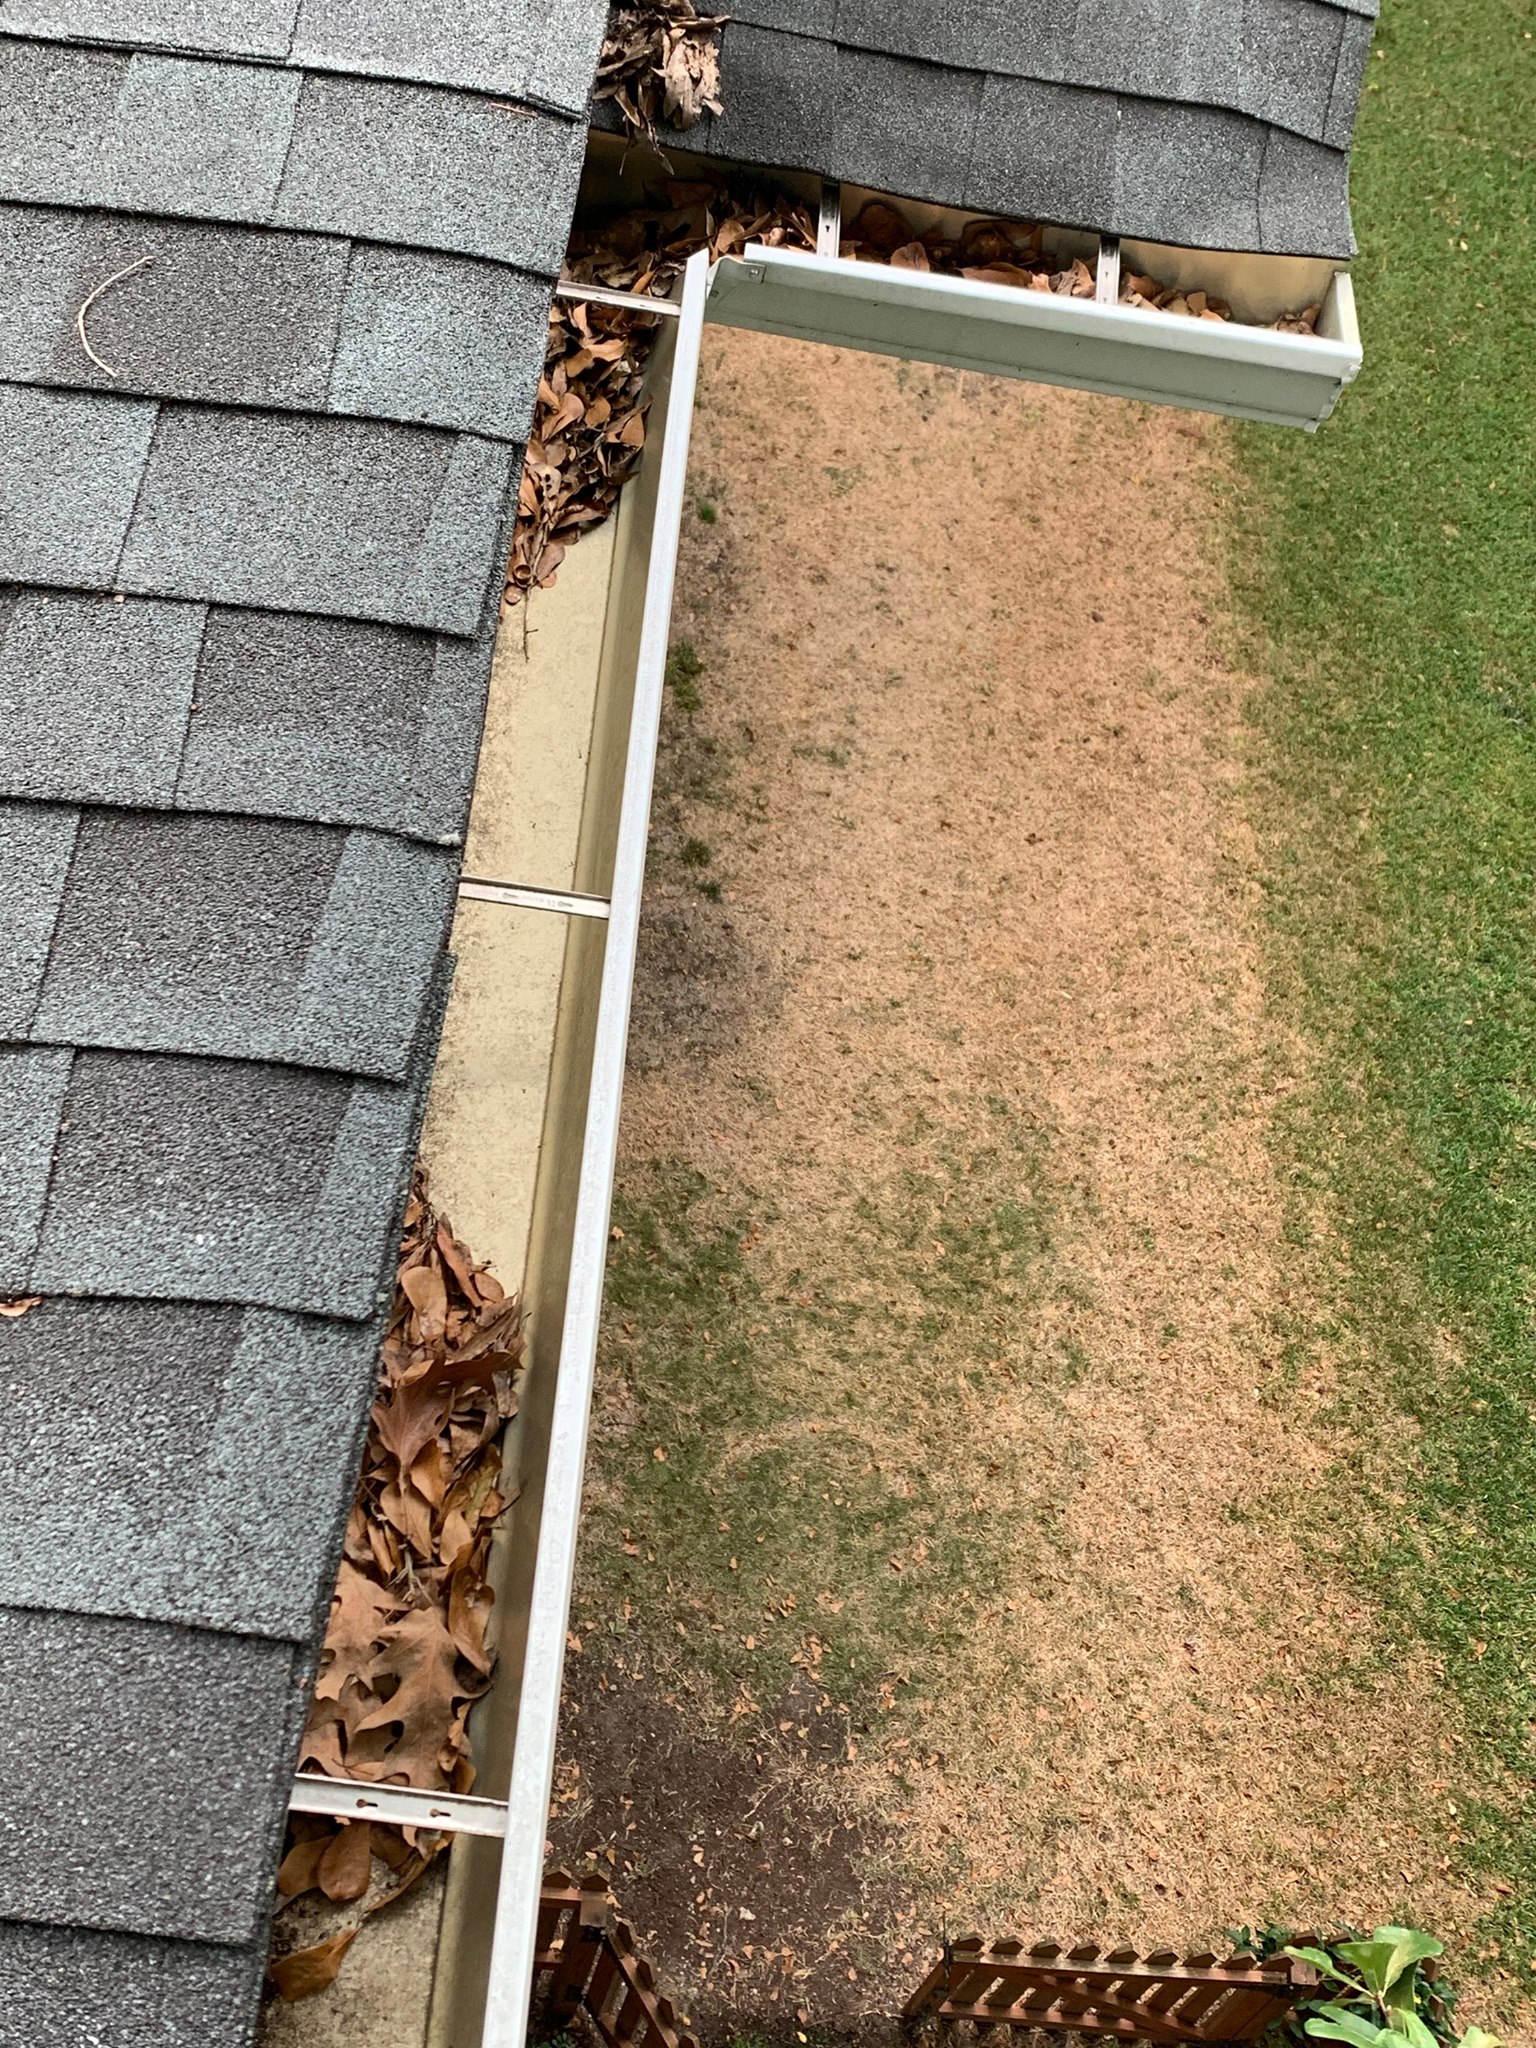 What to Look For When Hiring a Gutter Cleaning Company